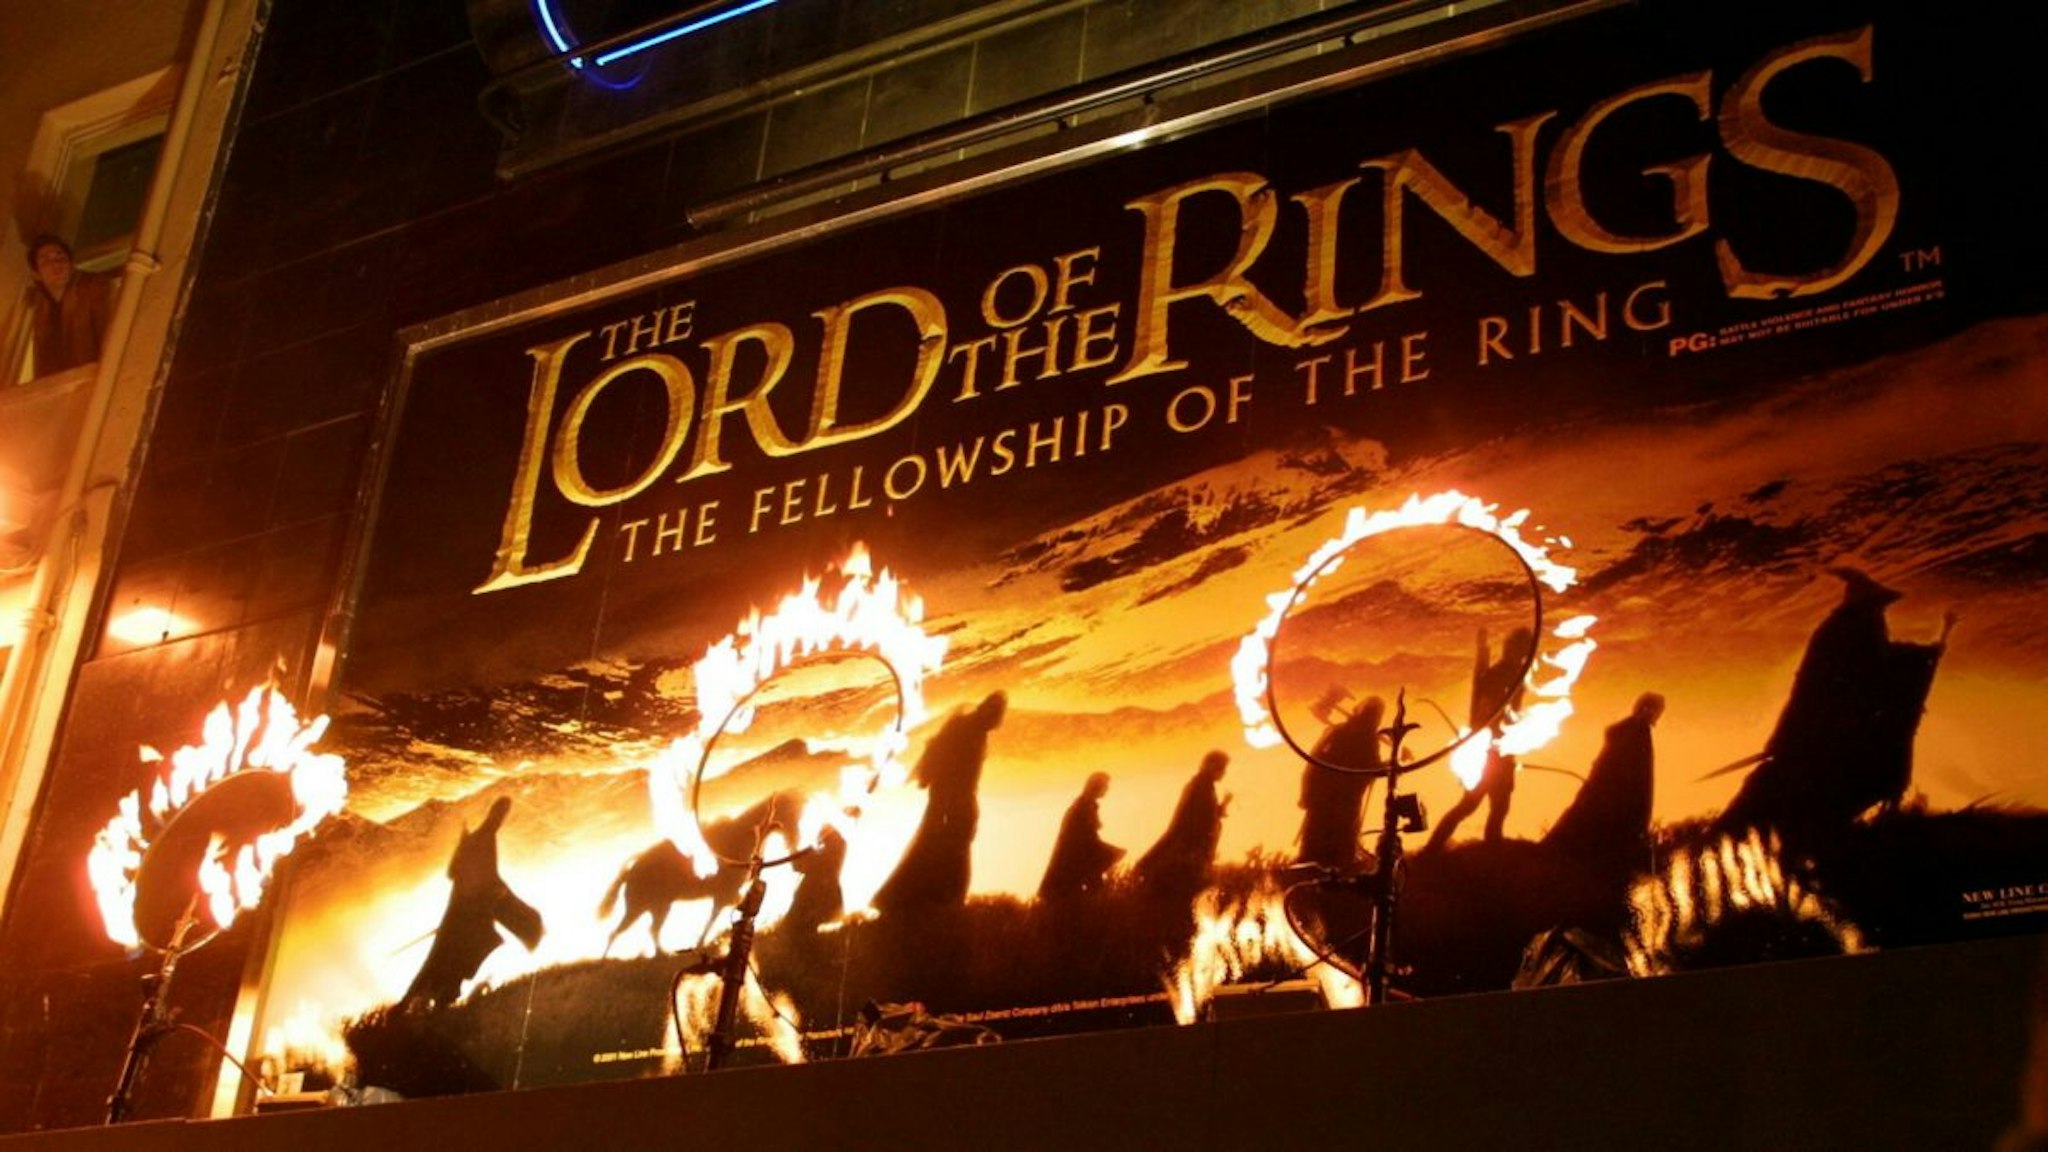 Rings of fire burn near the movie poster for the film "The Lord of the Rings: The Fellowship of the Ring." The stars of the film attended the premiere in London.